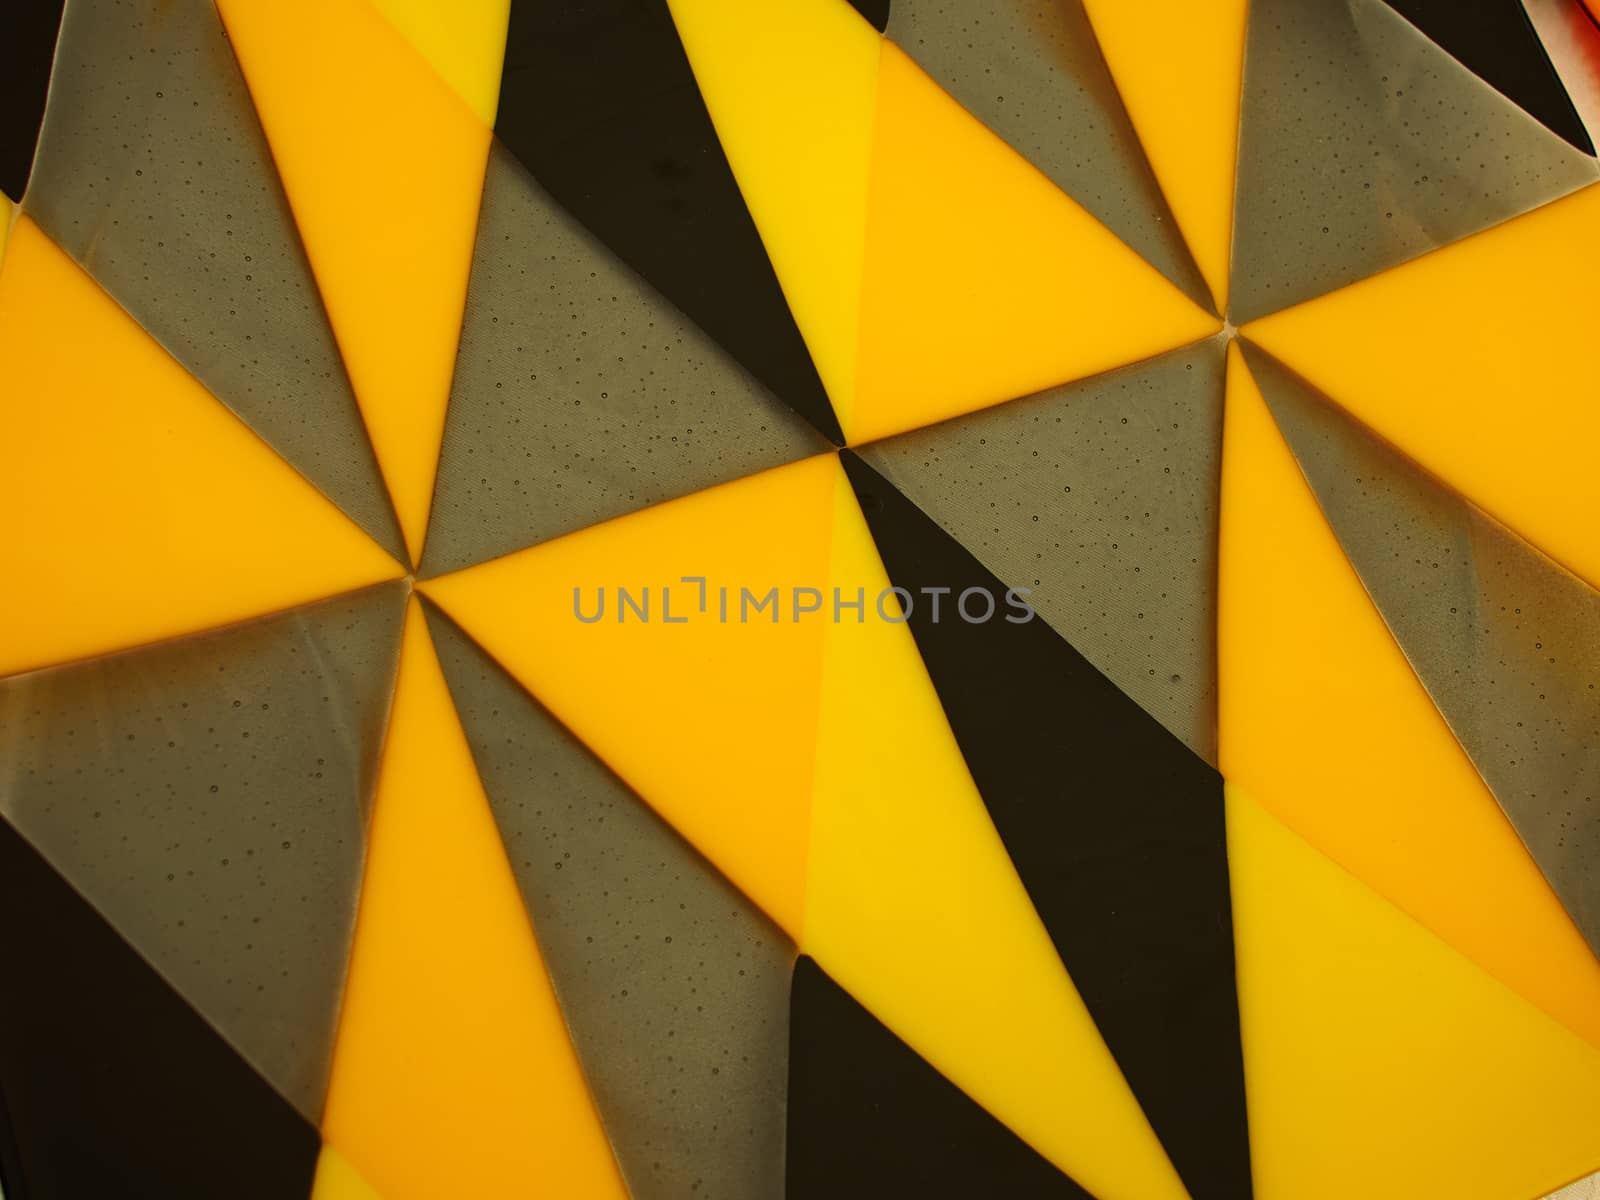 Beautiful creative handmade colored glass texture abstract pattern background yellow and black